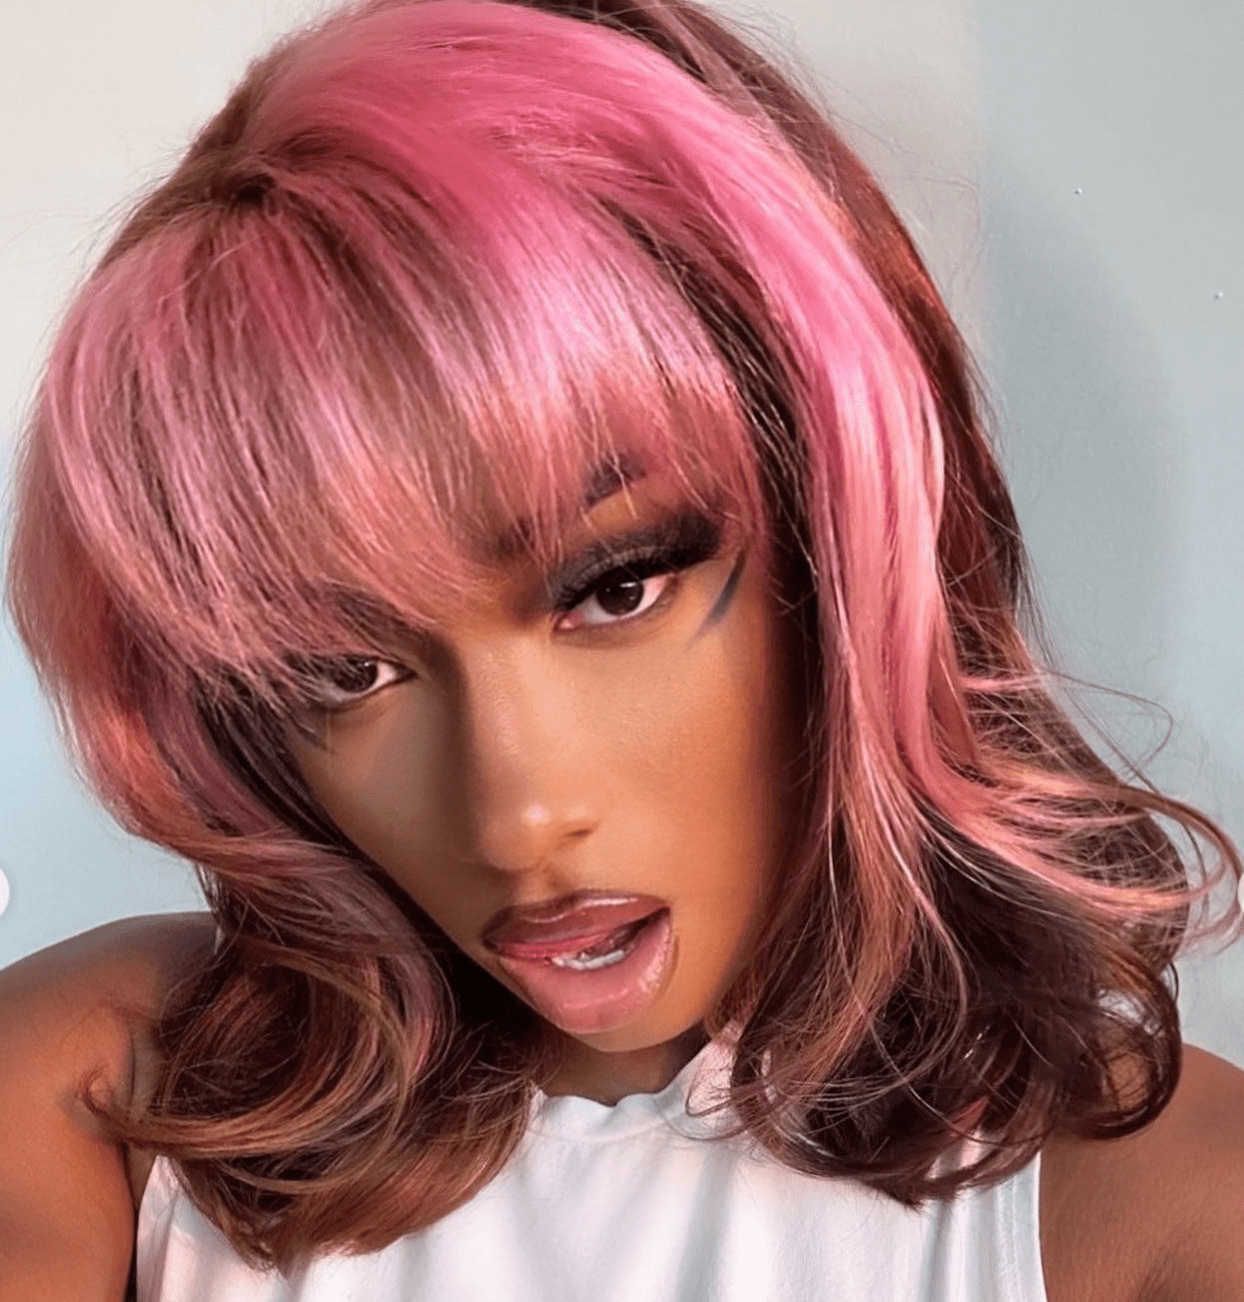 Megan Thee Stallion wears her grown out bob with pink money pieces